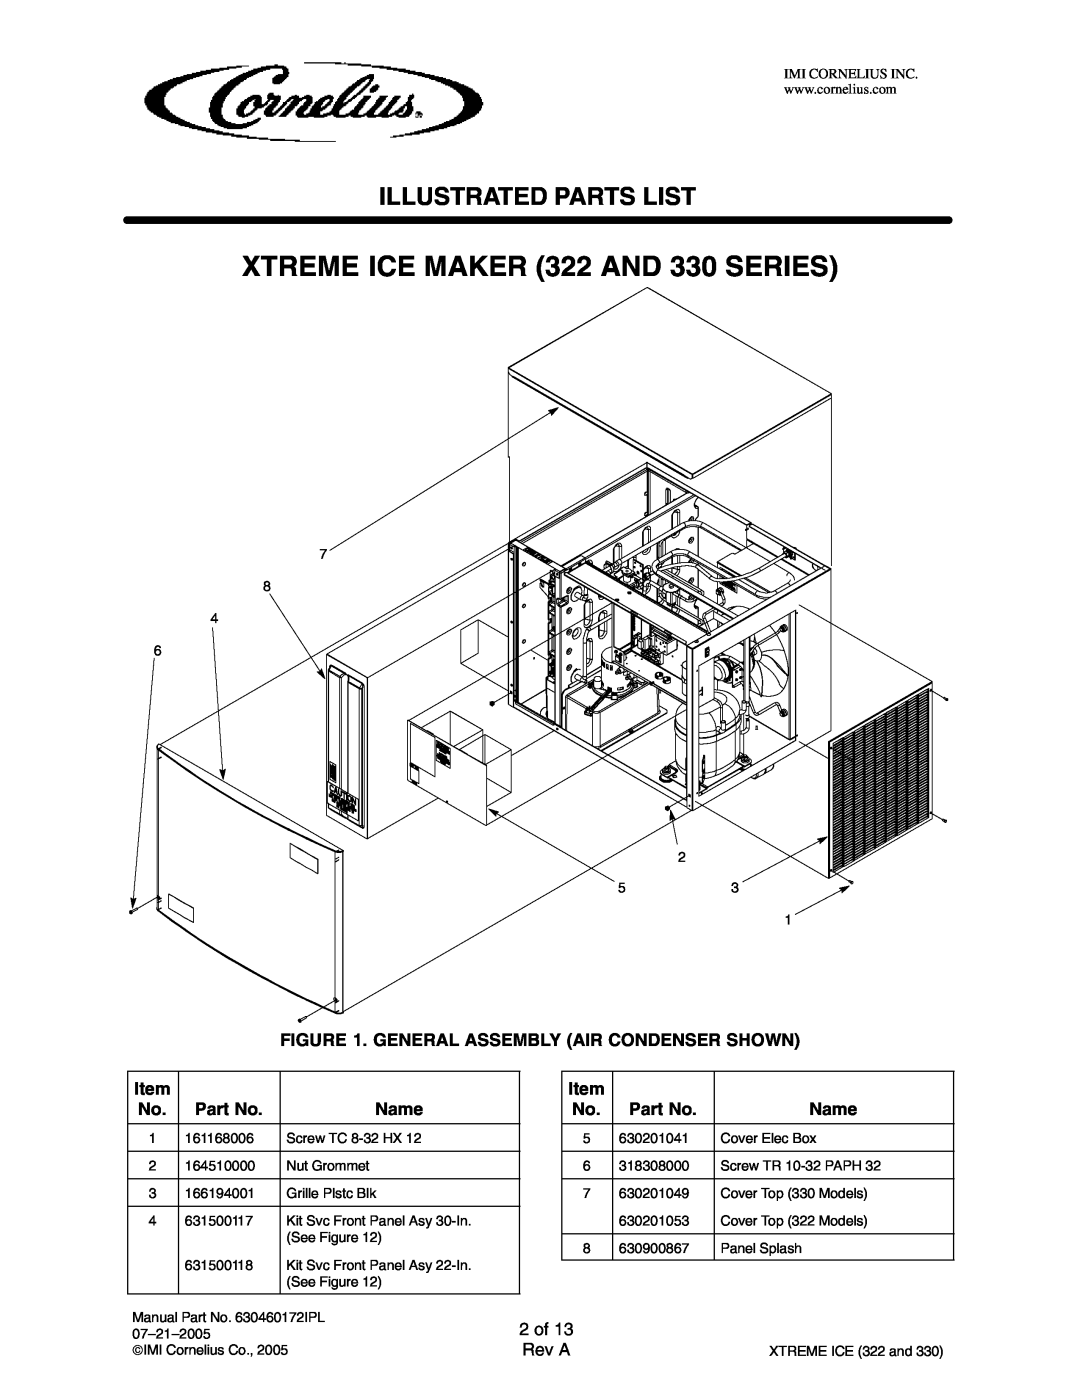 Cornelius 631803020, 631803001, 631803003 XTREME ICE MAKER 322 AND 330 SERIES, 2 of, Illustrated Parts List, Name, Rev A 